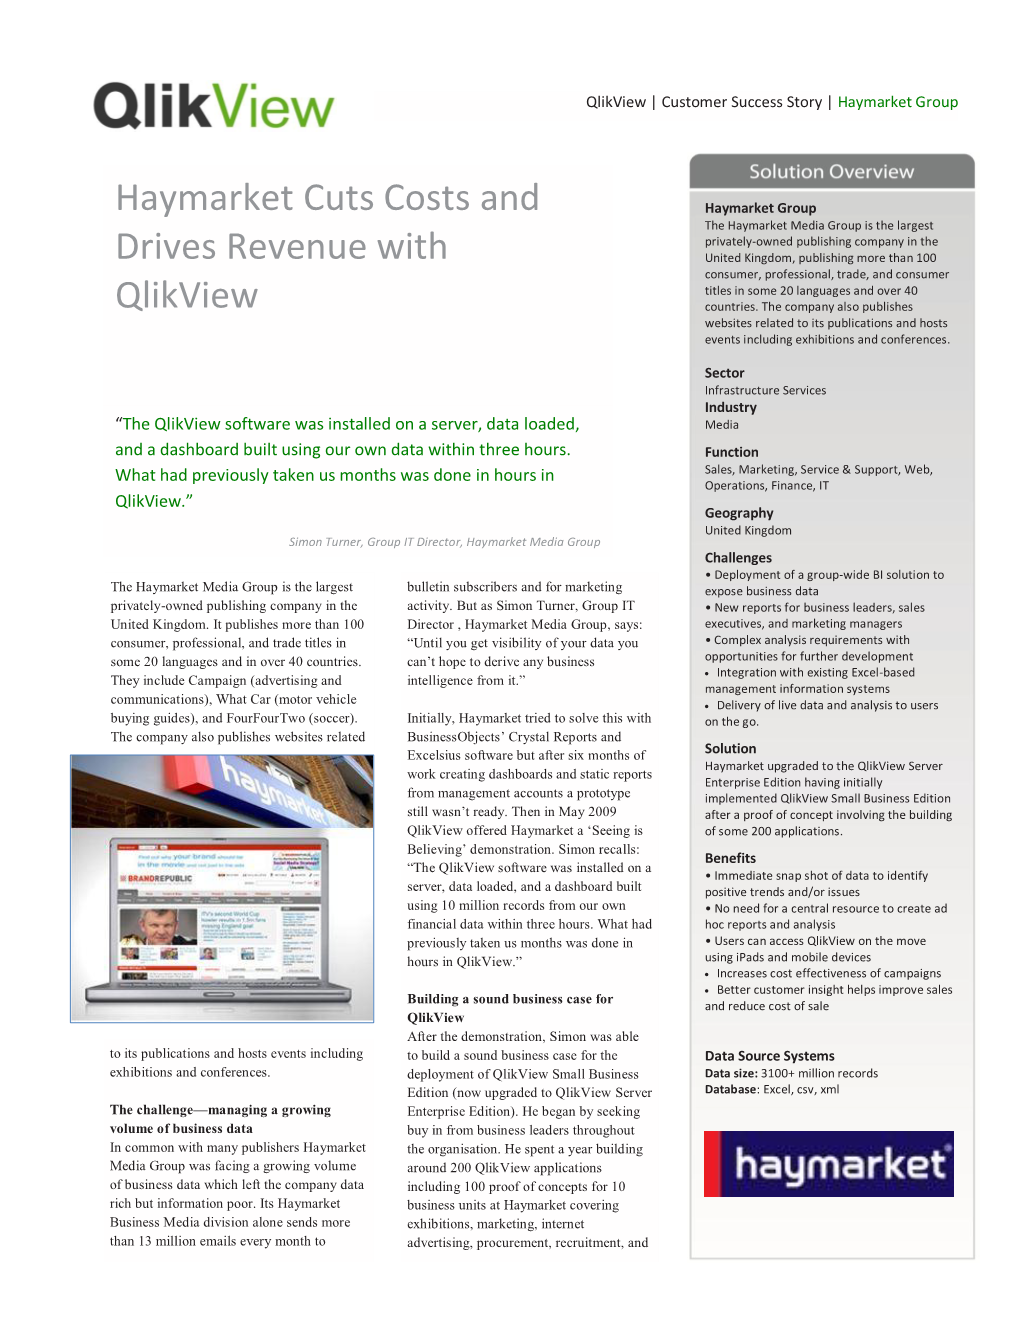 Haymarket Cuts Costs and Drives Revenue with Qlikview